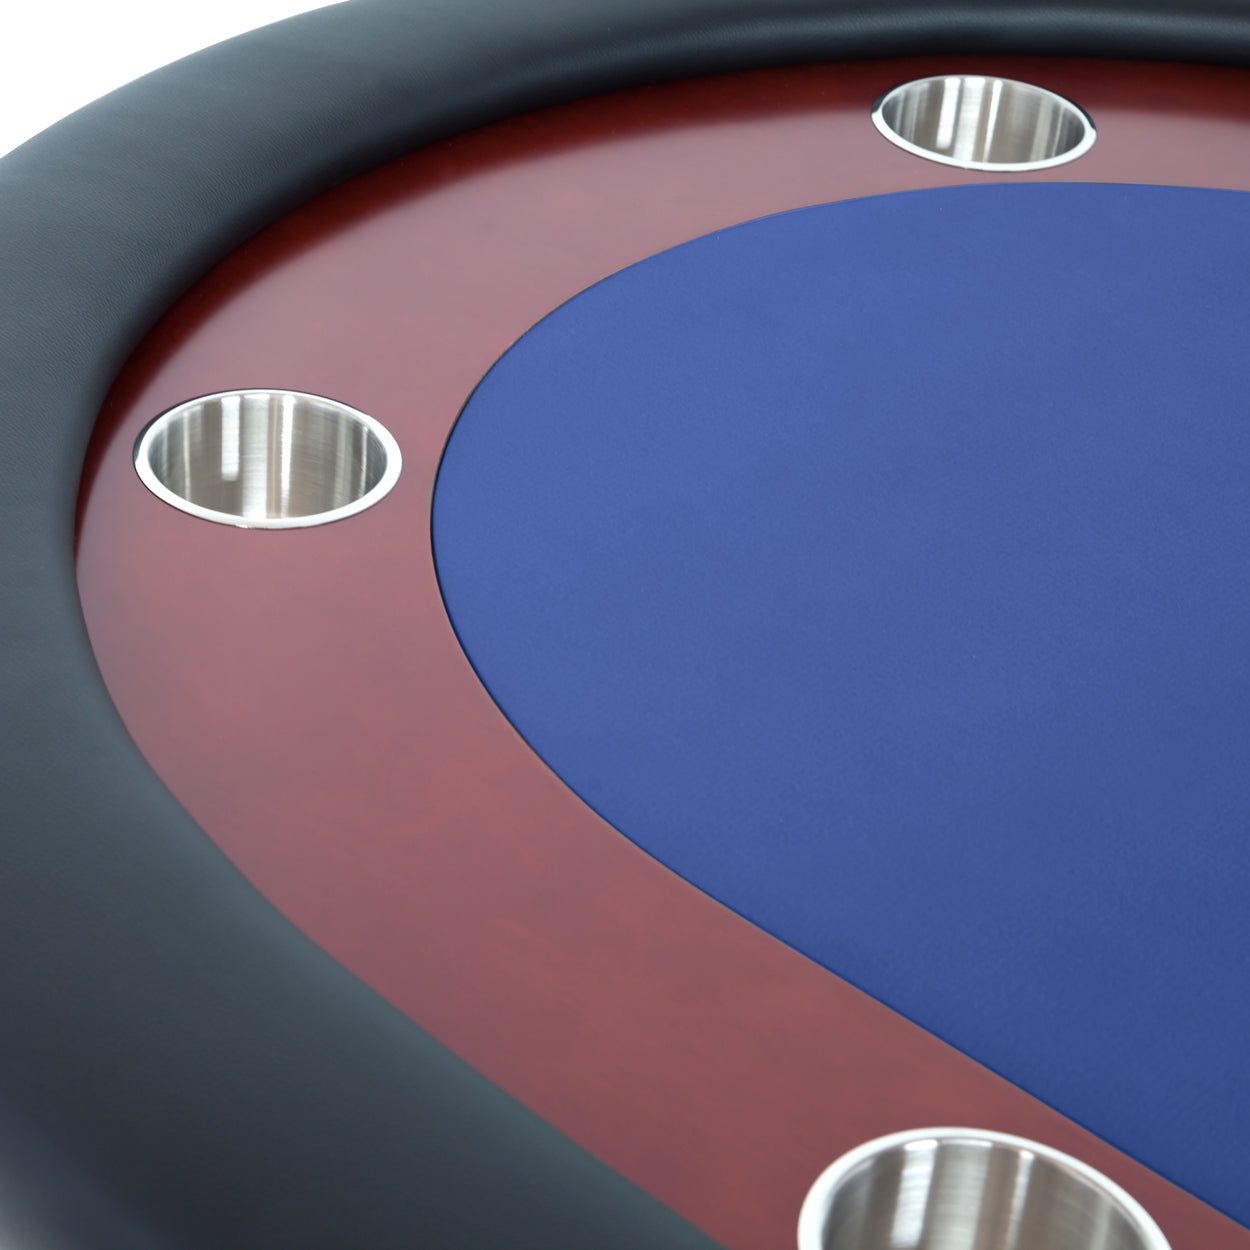 BBO The Rockwell Premium Poker Table blue close up 